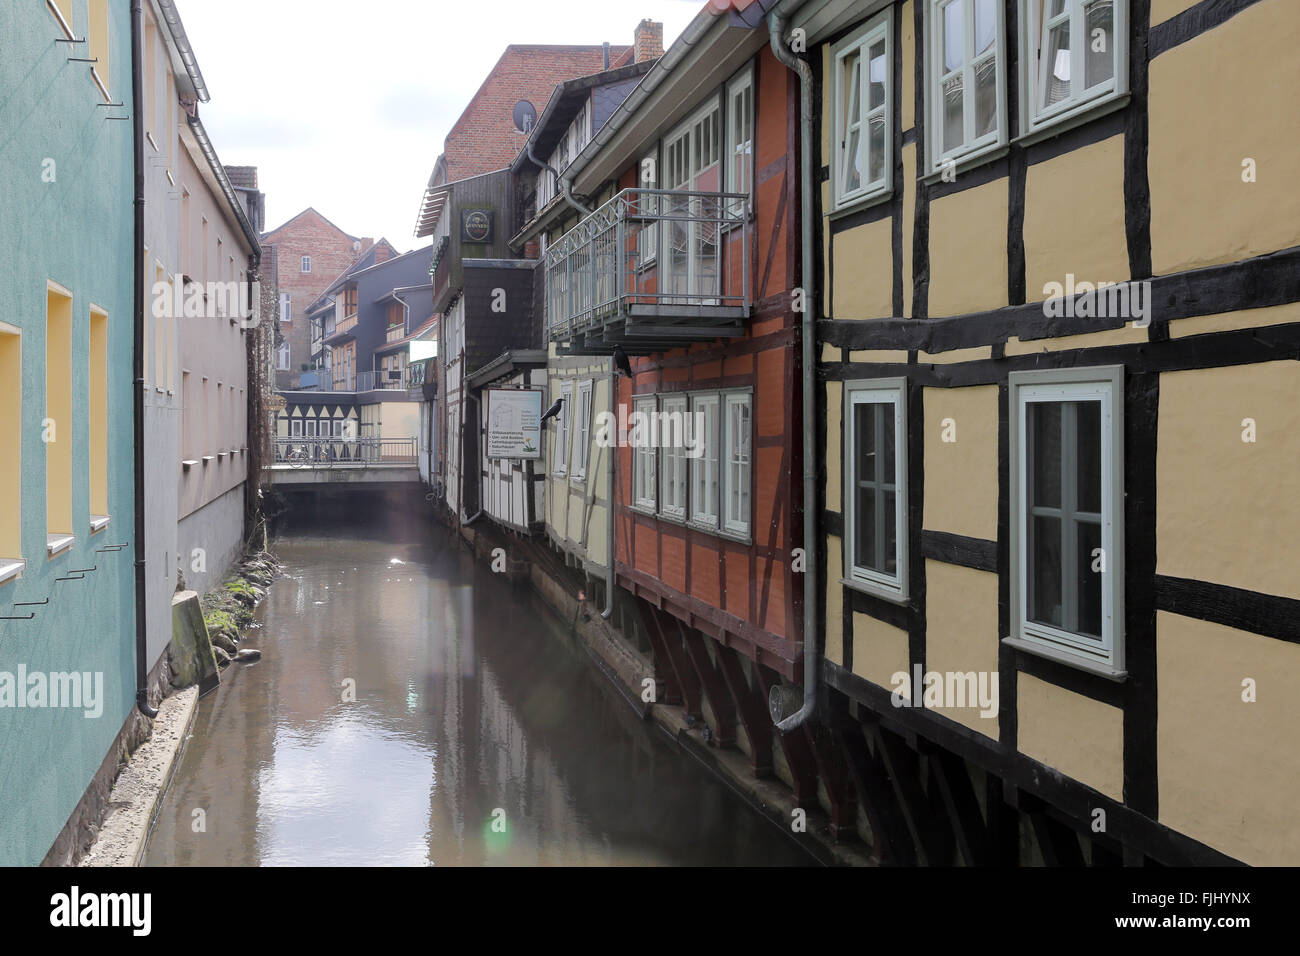 River Jeetze in the old town of Salzwedel, Altmark, Sachsen Anhalt, Germany, Europe Stock Photo